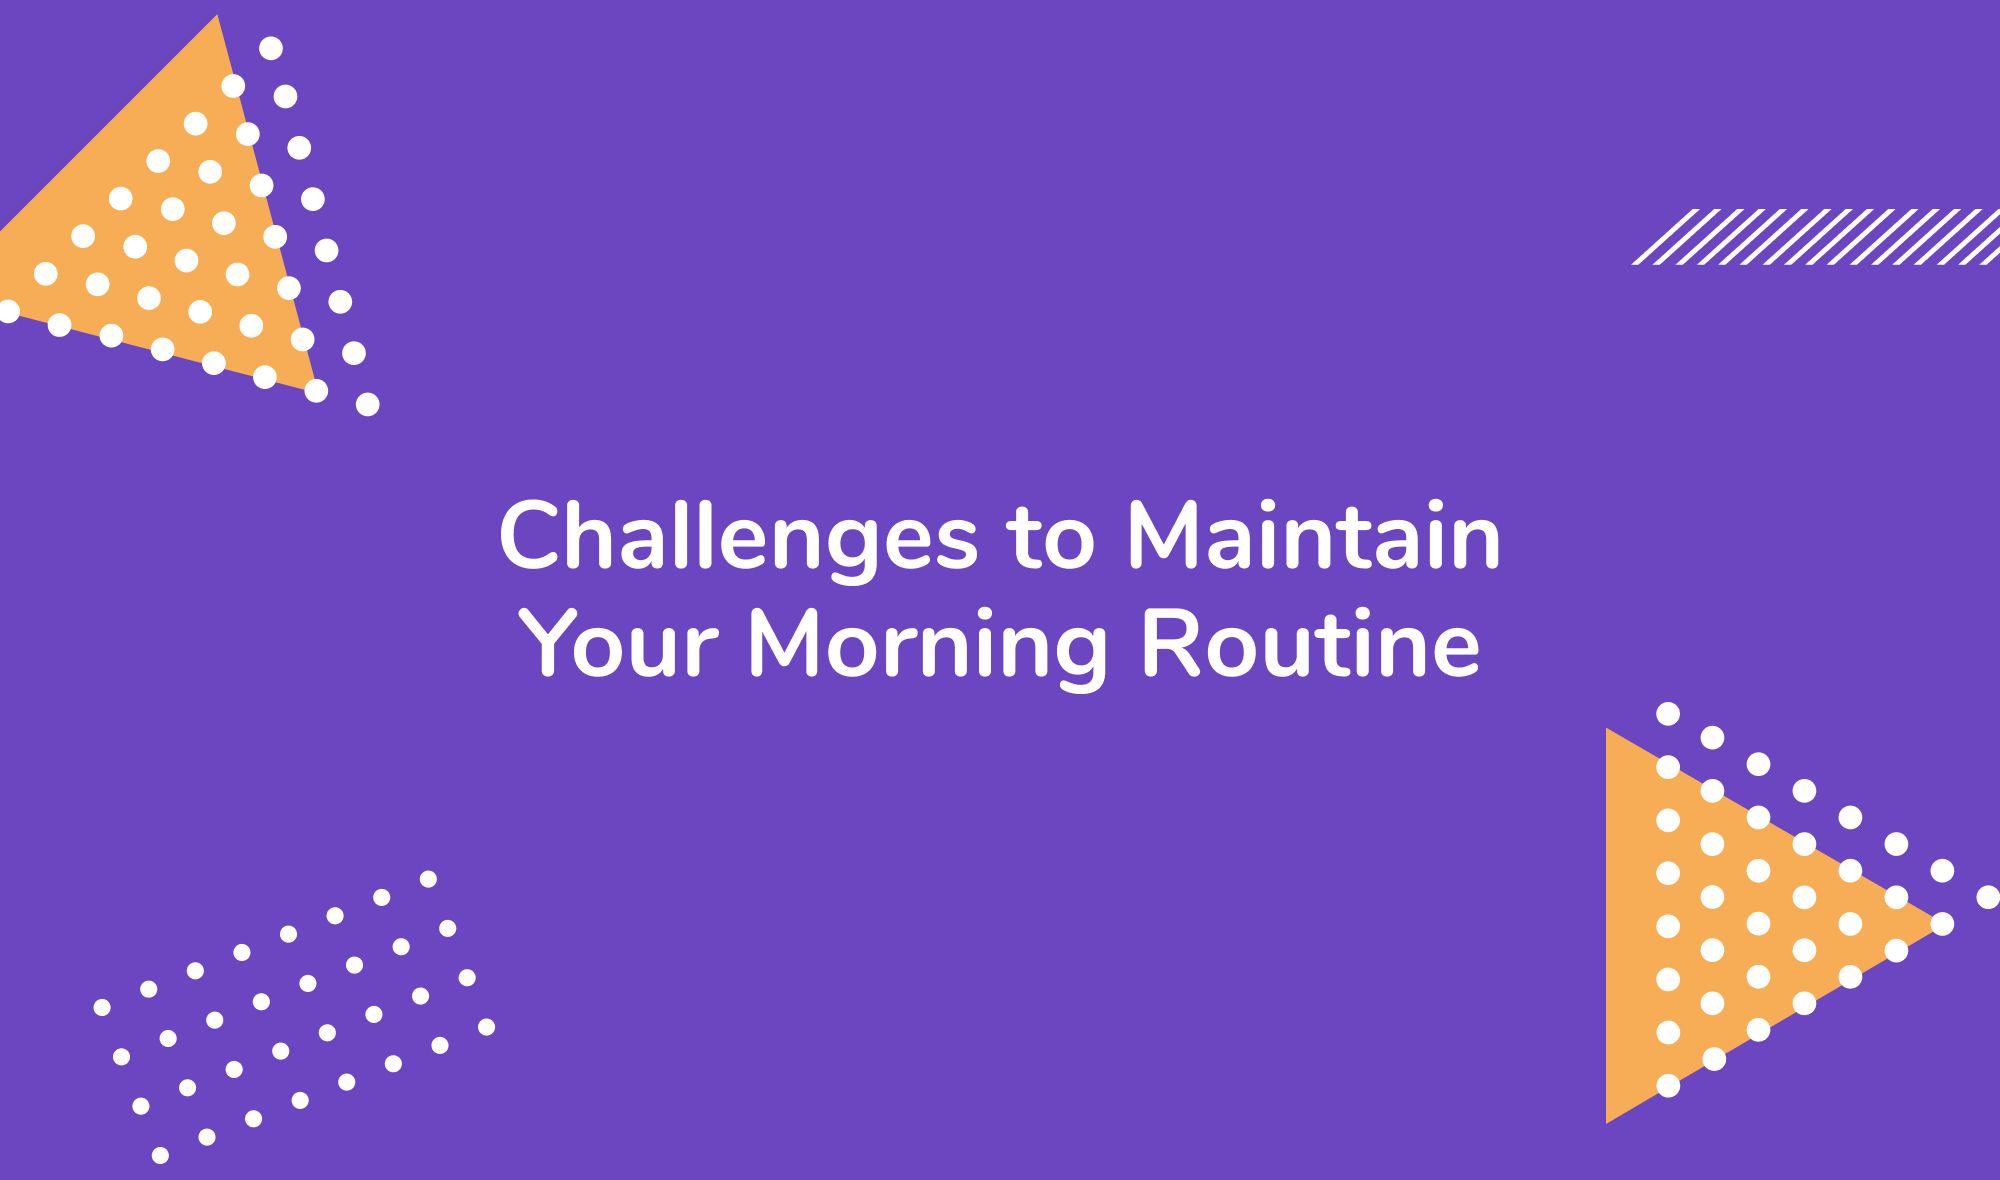 Challenges to Maintain Your Morning Routine and How to Overcome Them